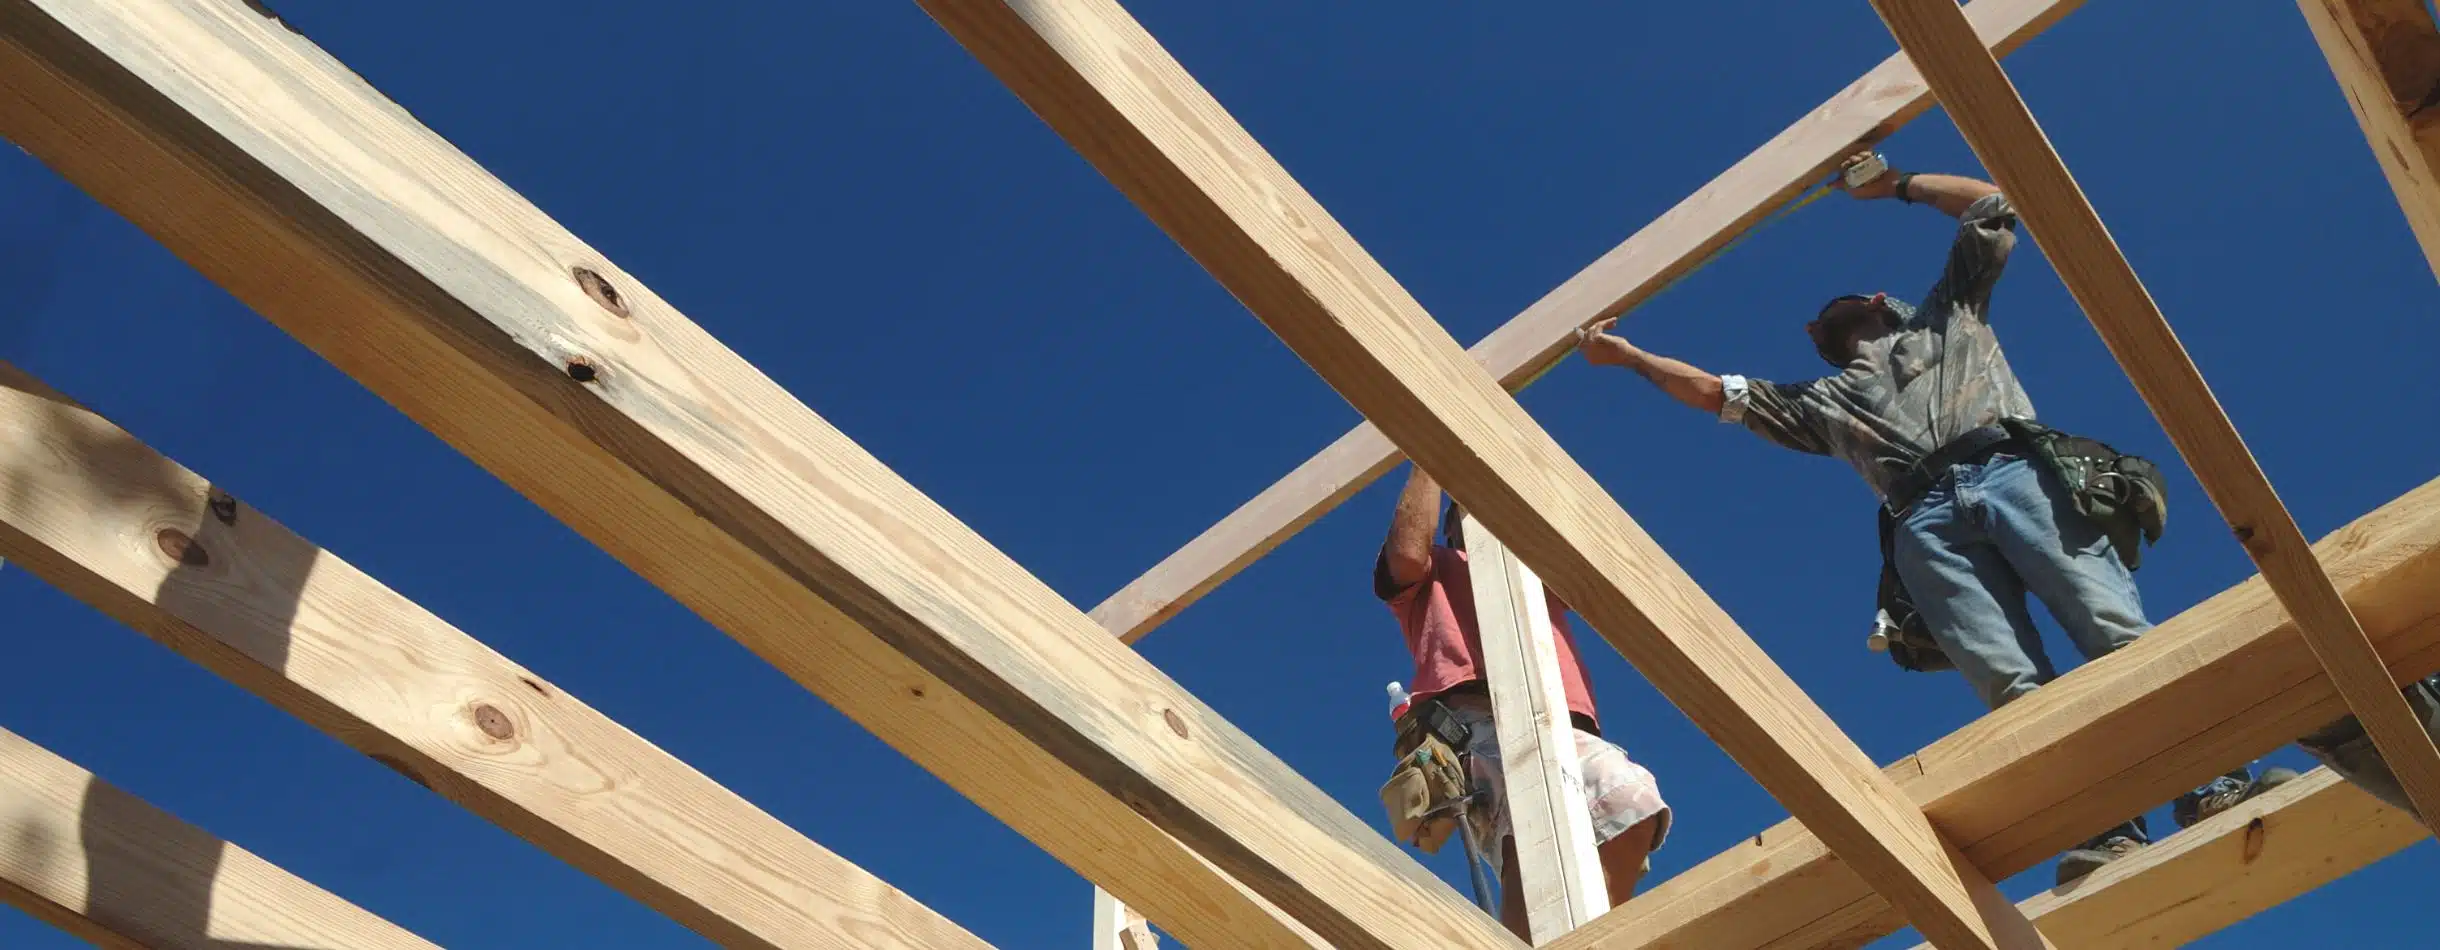 Two construction workers stand on wooden beams as they continue to assemble a house's frame.